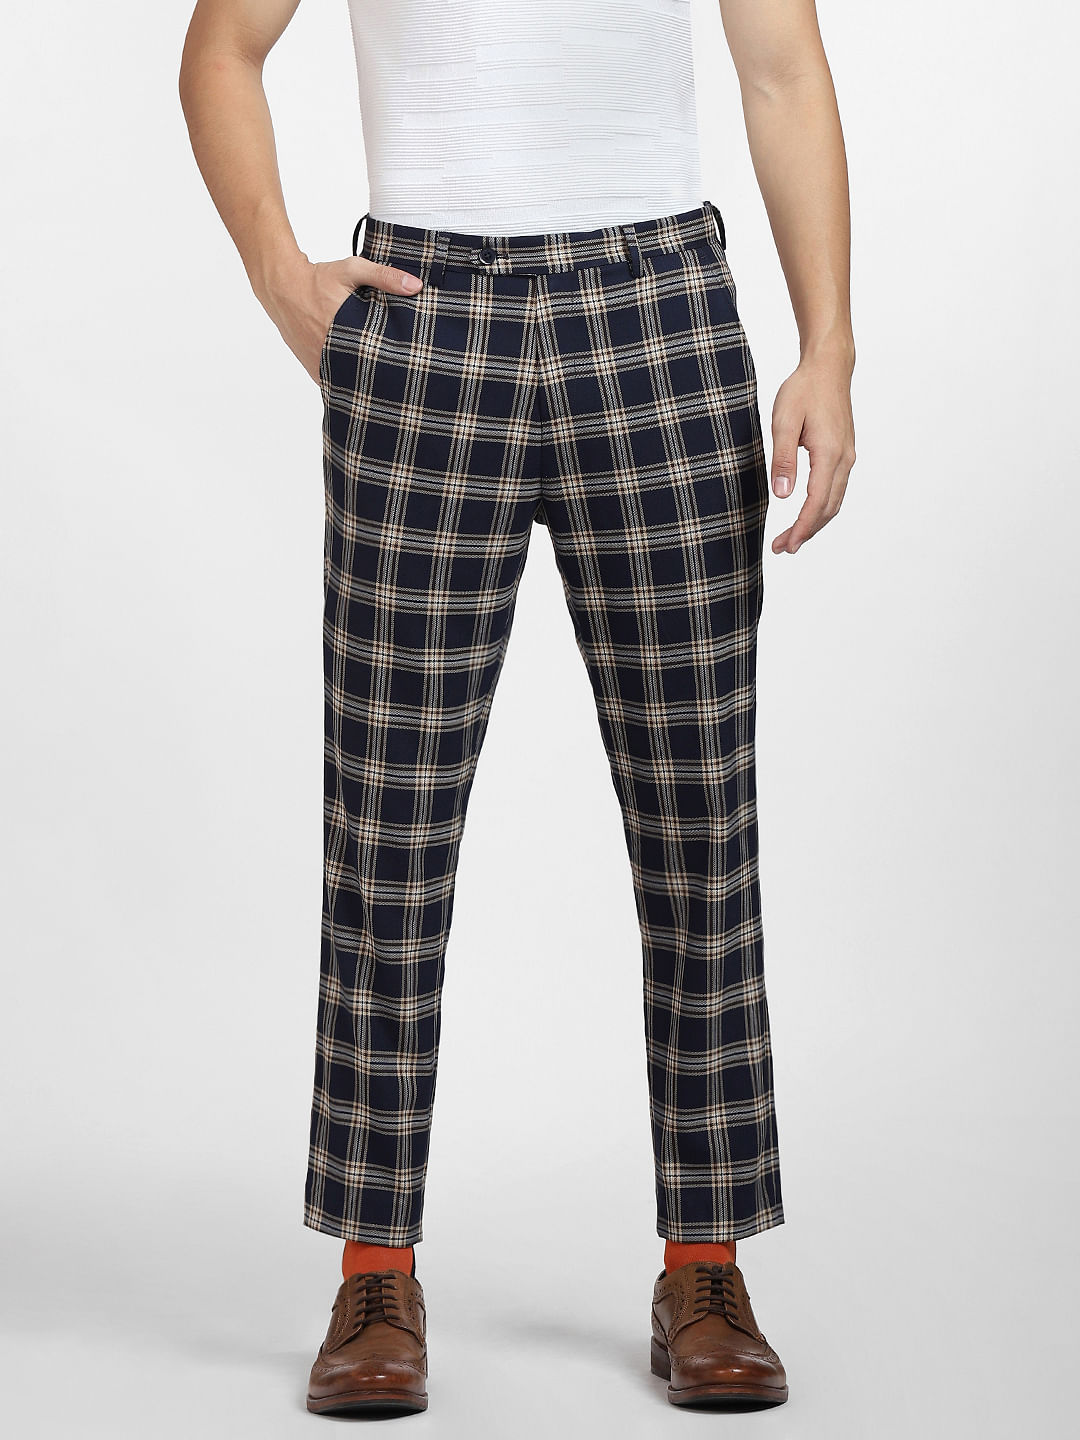 Buy DOROTHY PERKINS Women Black  White Regular Fit Printed Trousers   Trousers for Women 4704466  Myntra